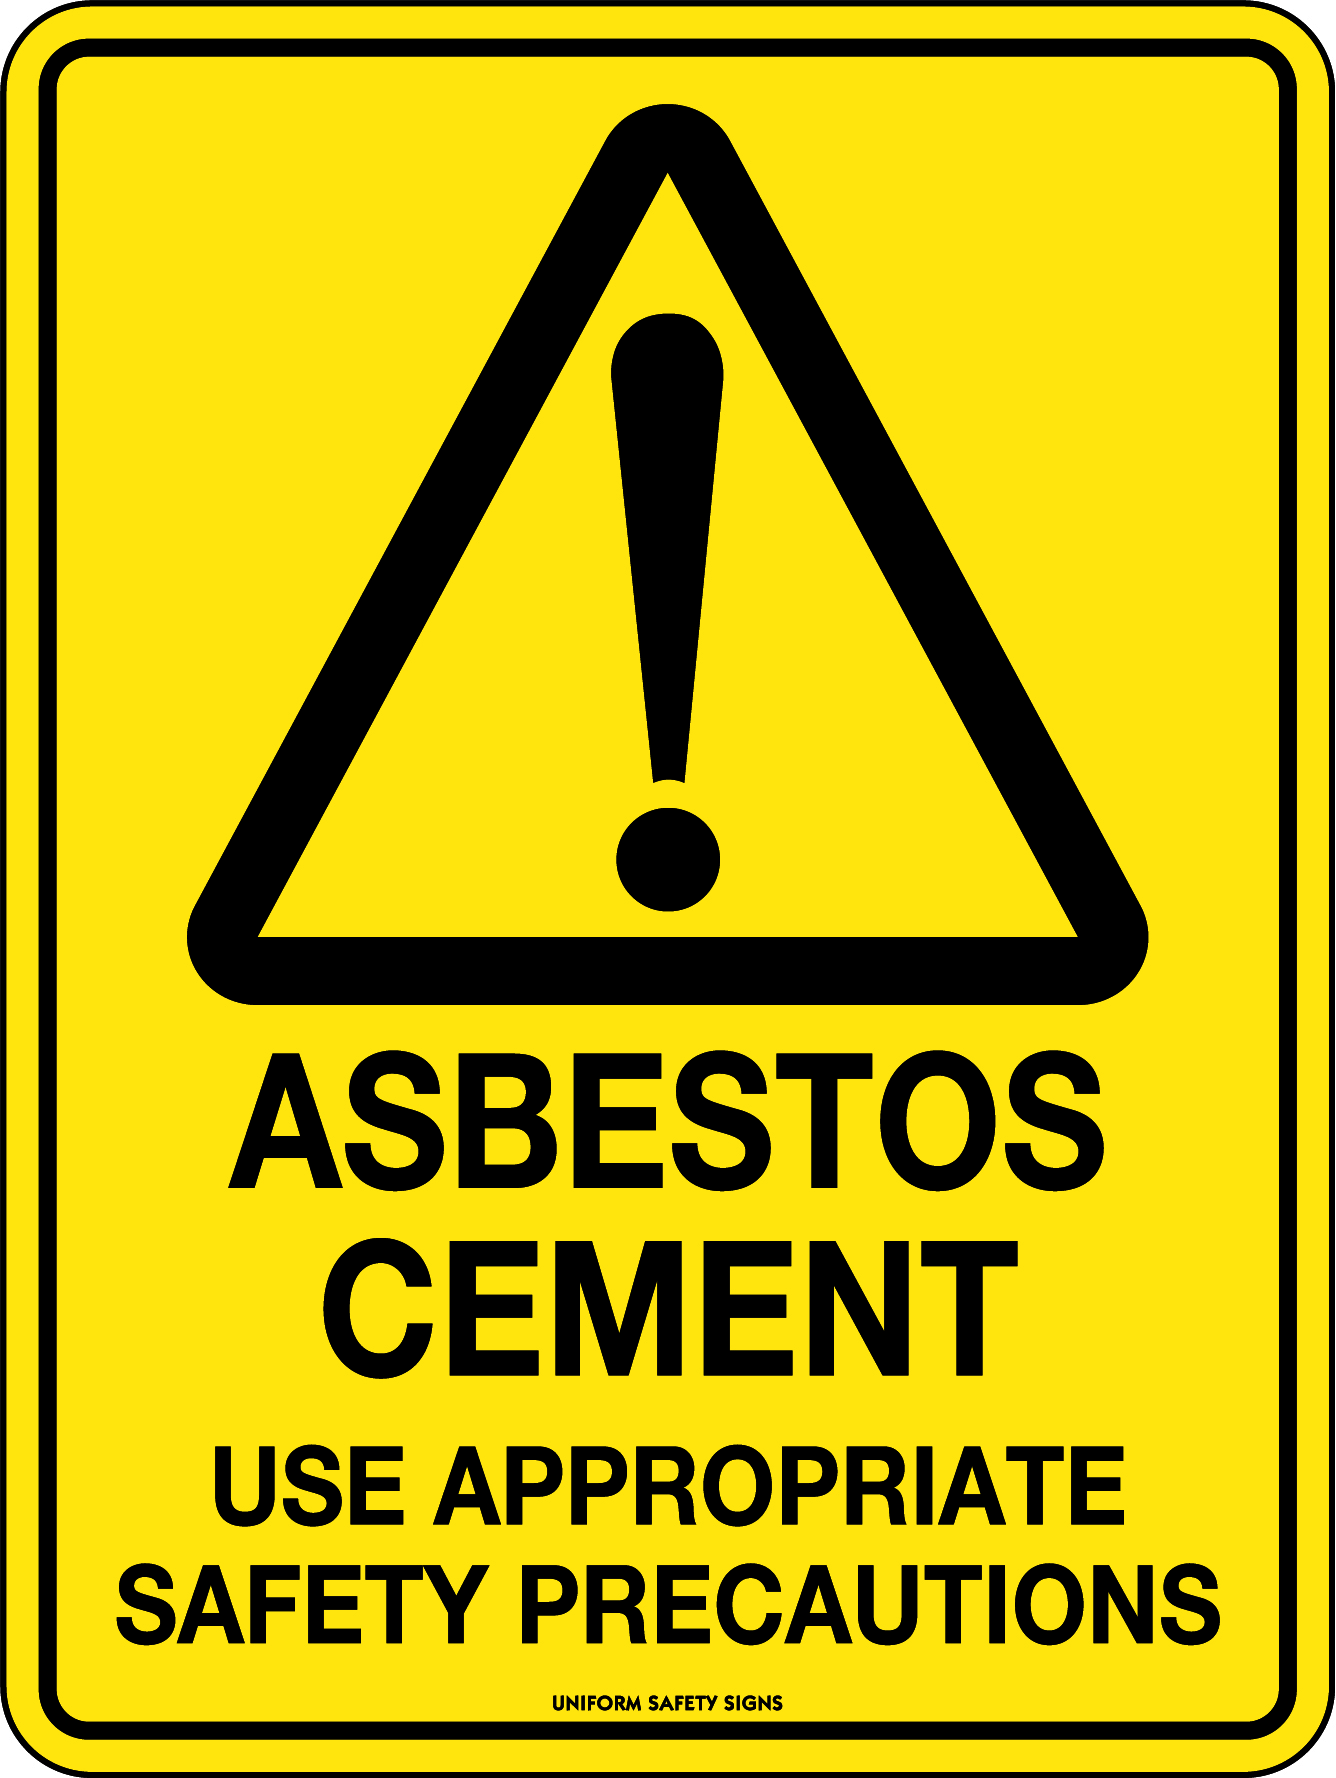 SIGN 300 X 225MM METAL ASBESTOS CEMENT USE APPROPRIATE SAFETY PRECAUTIONS